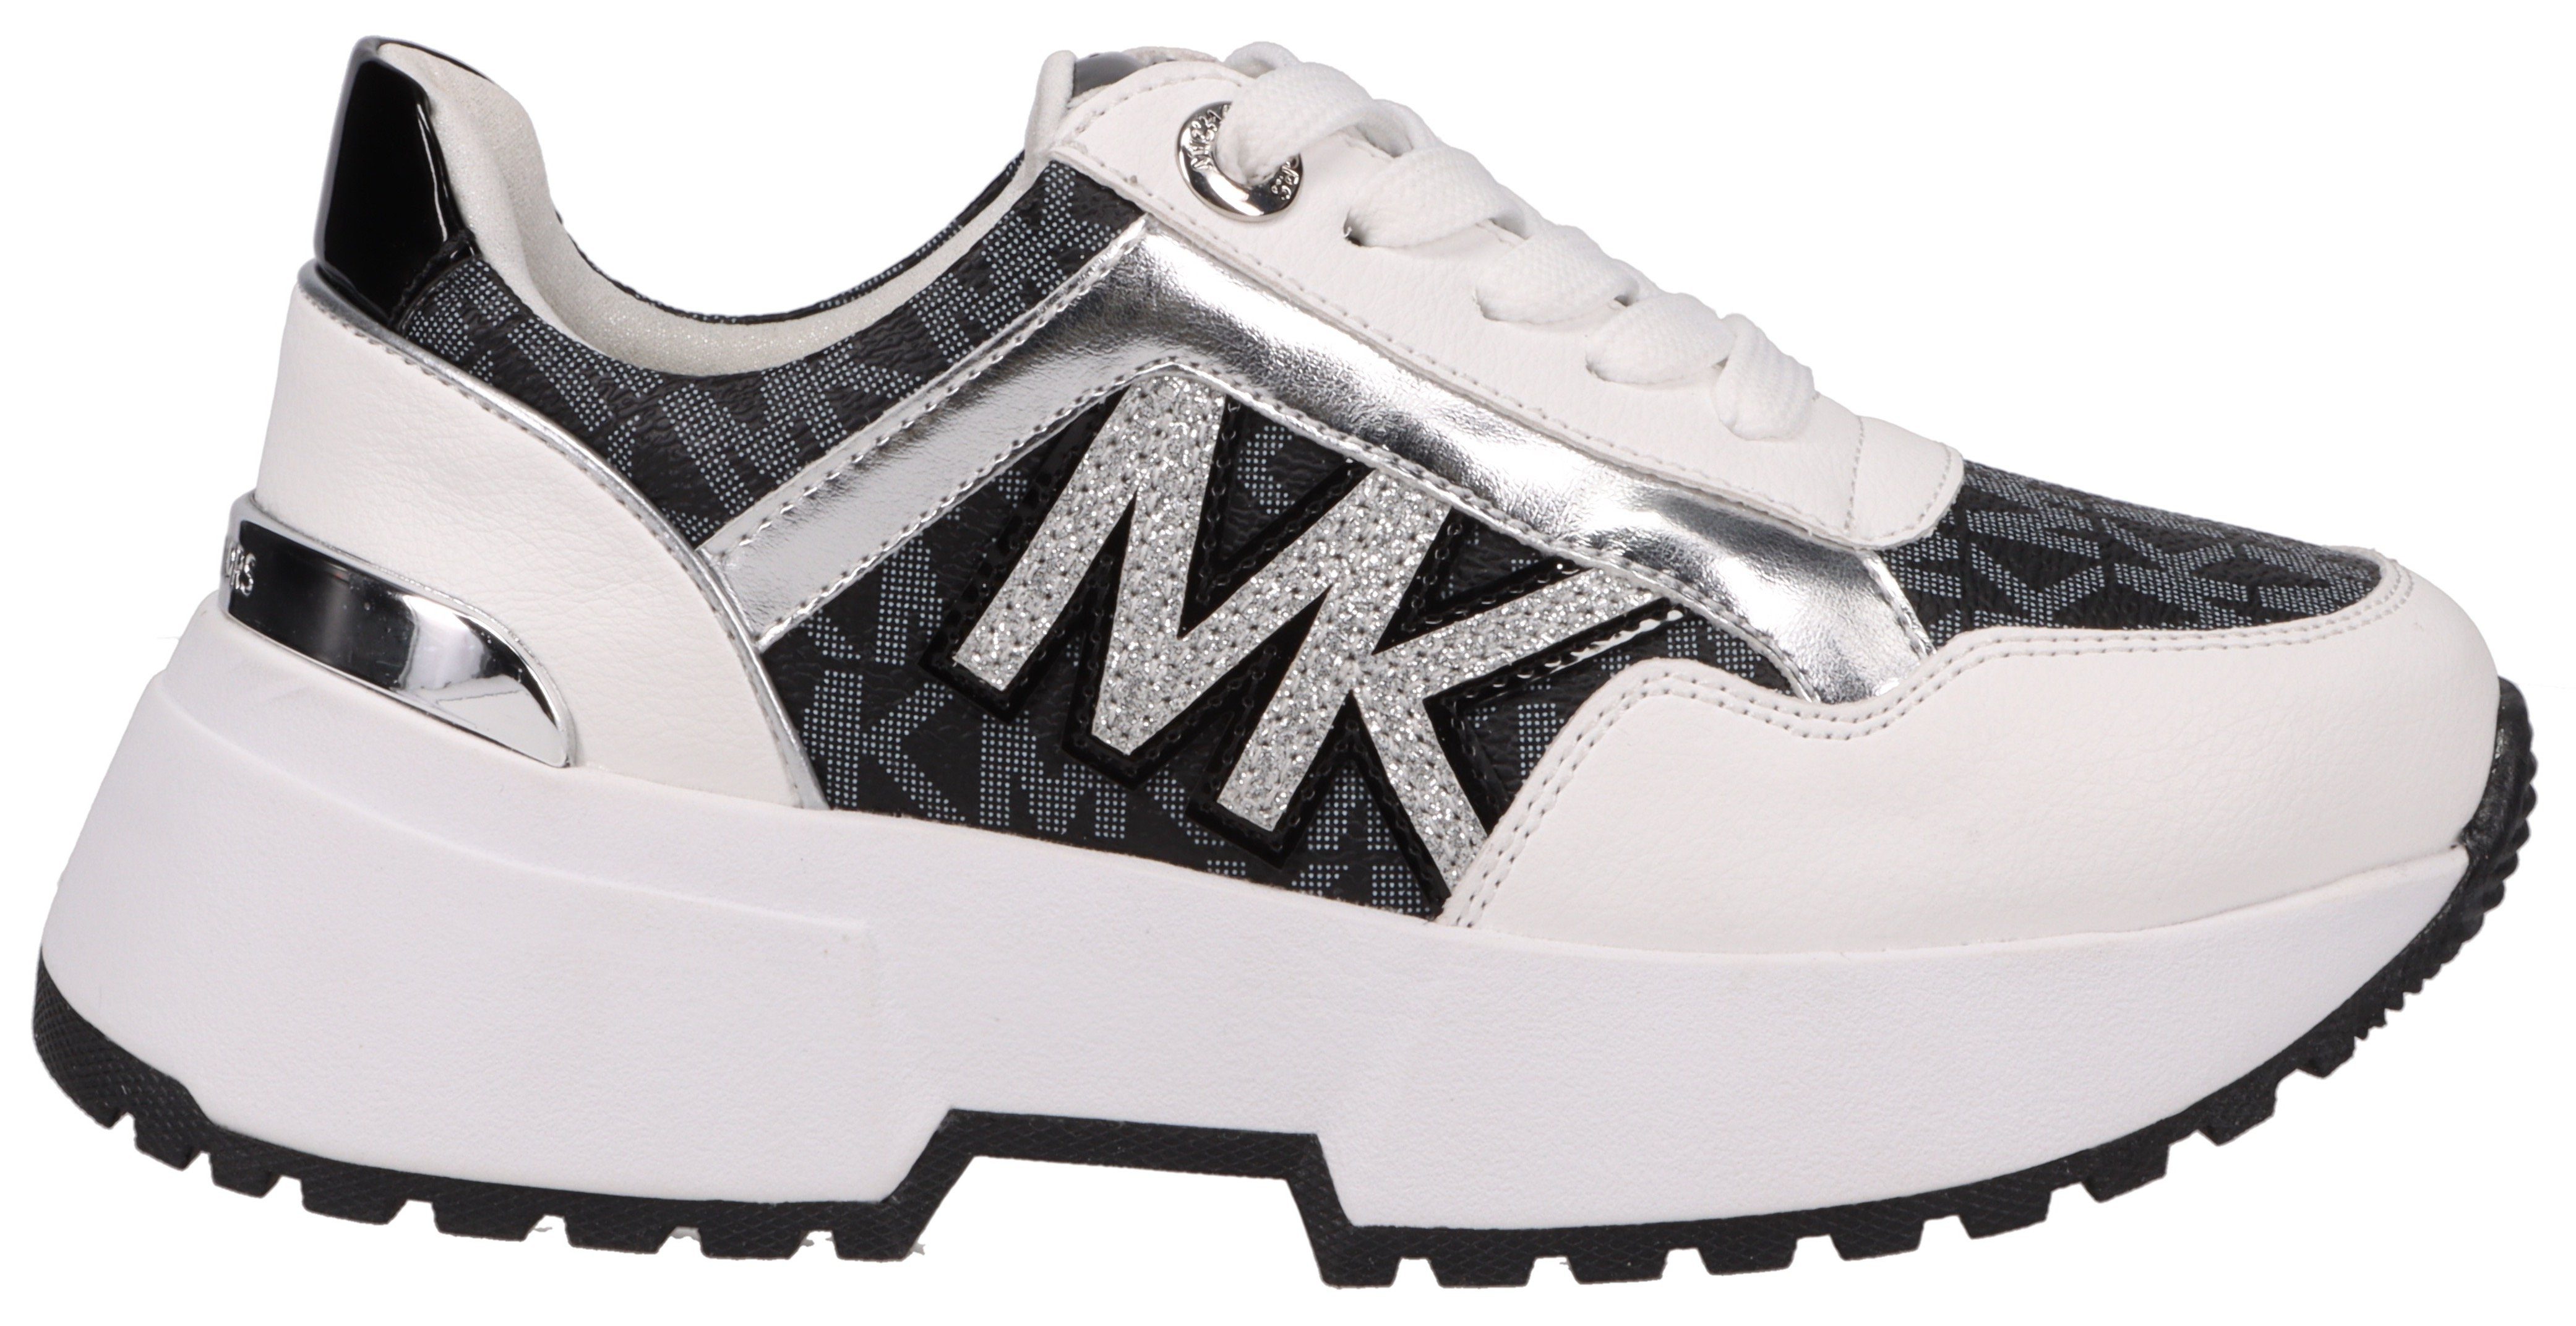 MICHAEL KORS KIDS Sneaker Cosmo Plateausneaker Maddy Chunky-Laufsohle mit